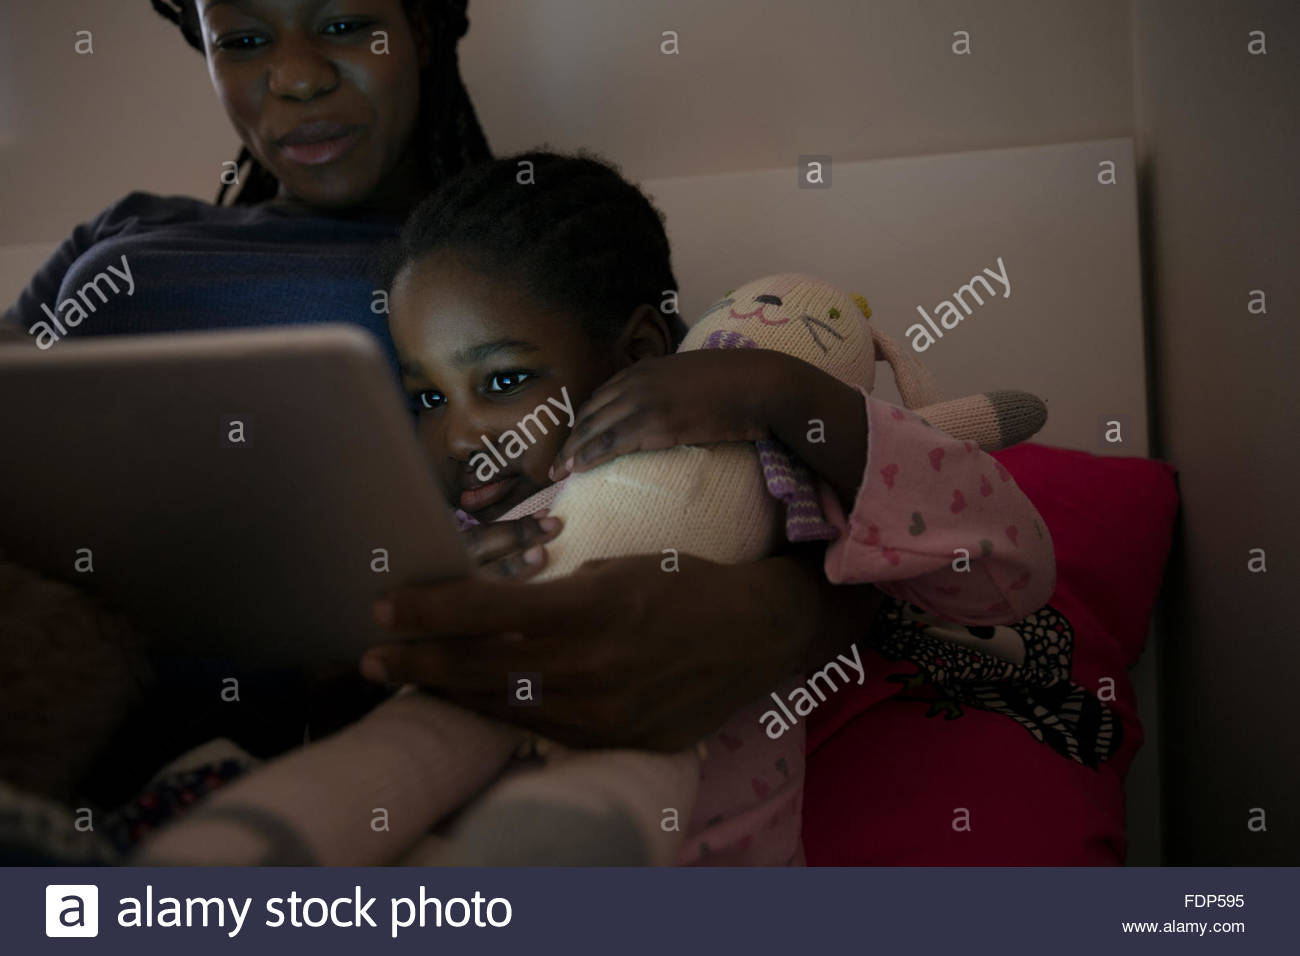 Mother and daughter using digital tablet at bedtime Stock Photo